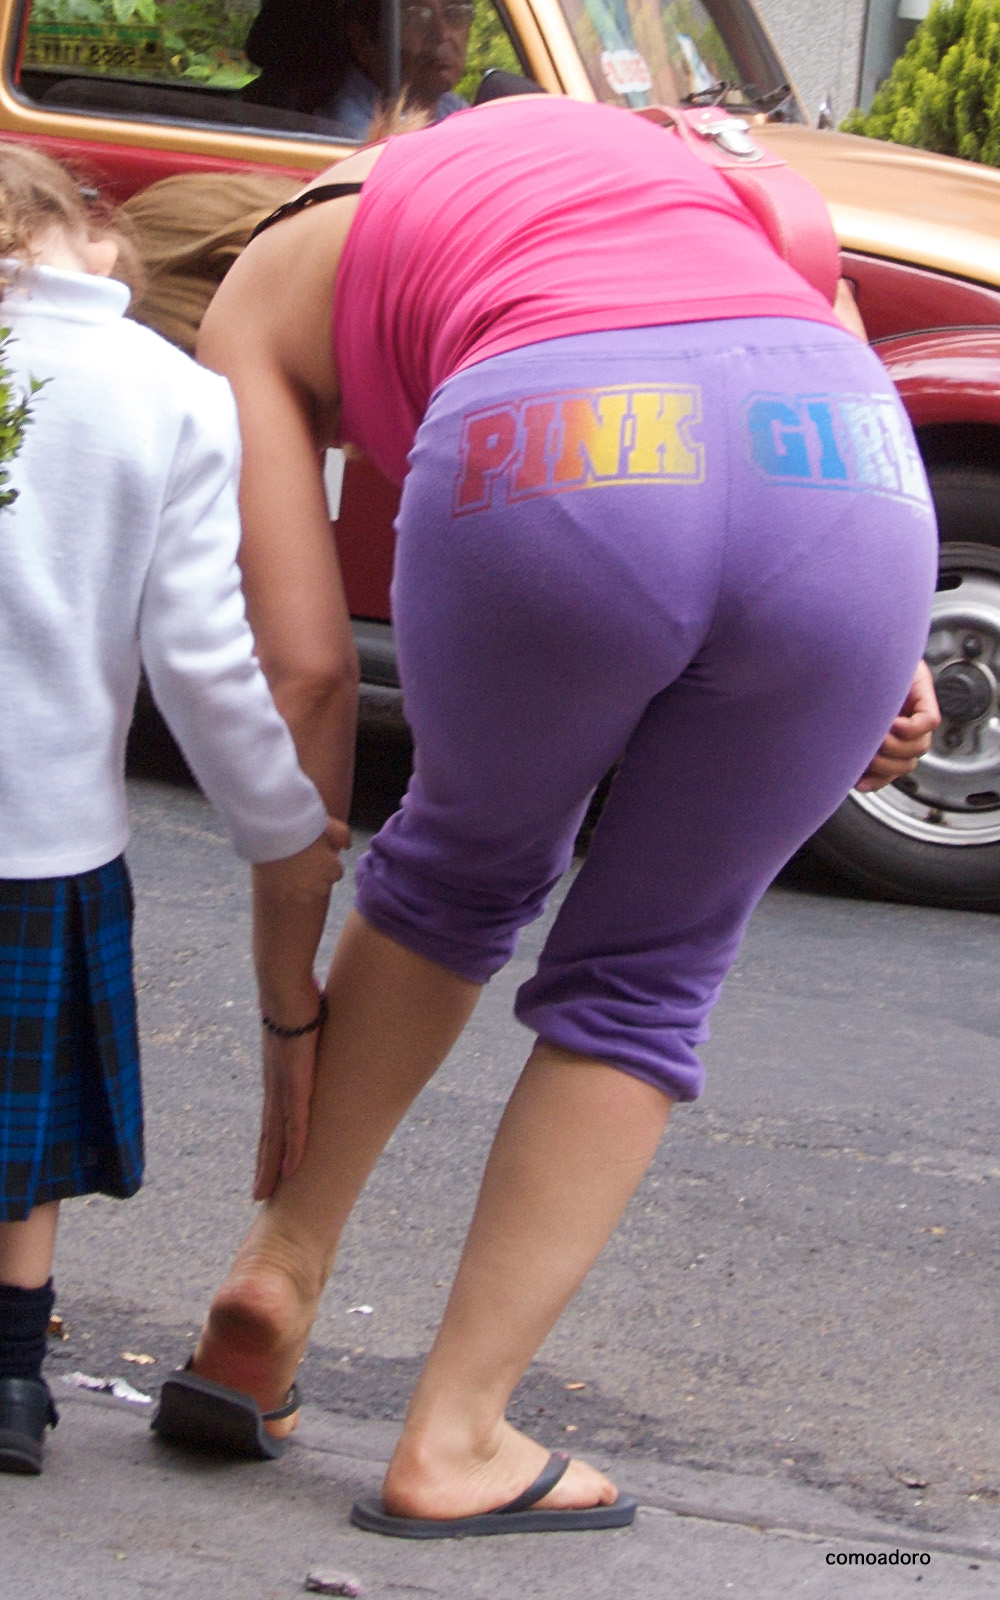 Chubby in spandex